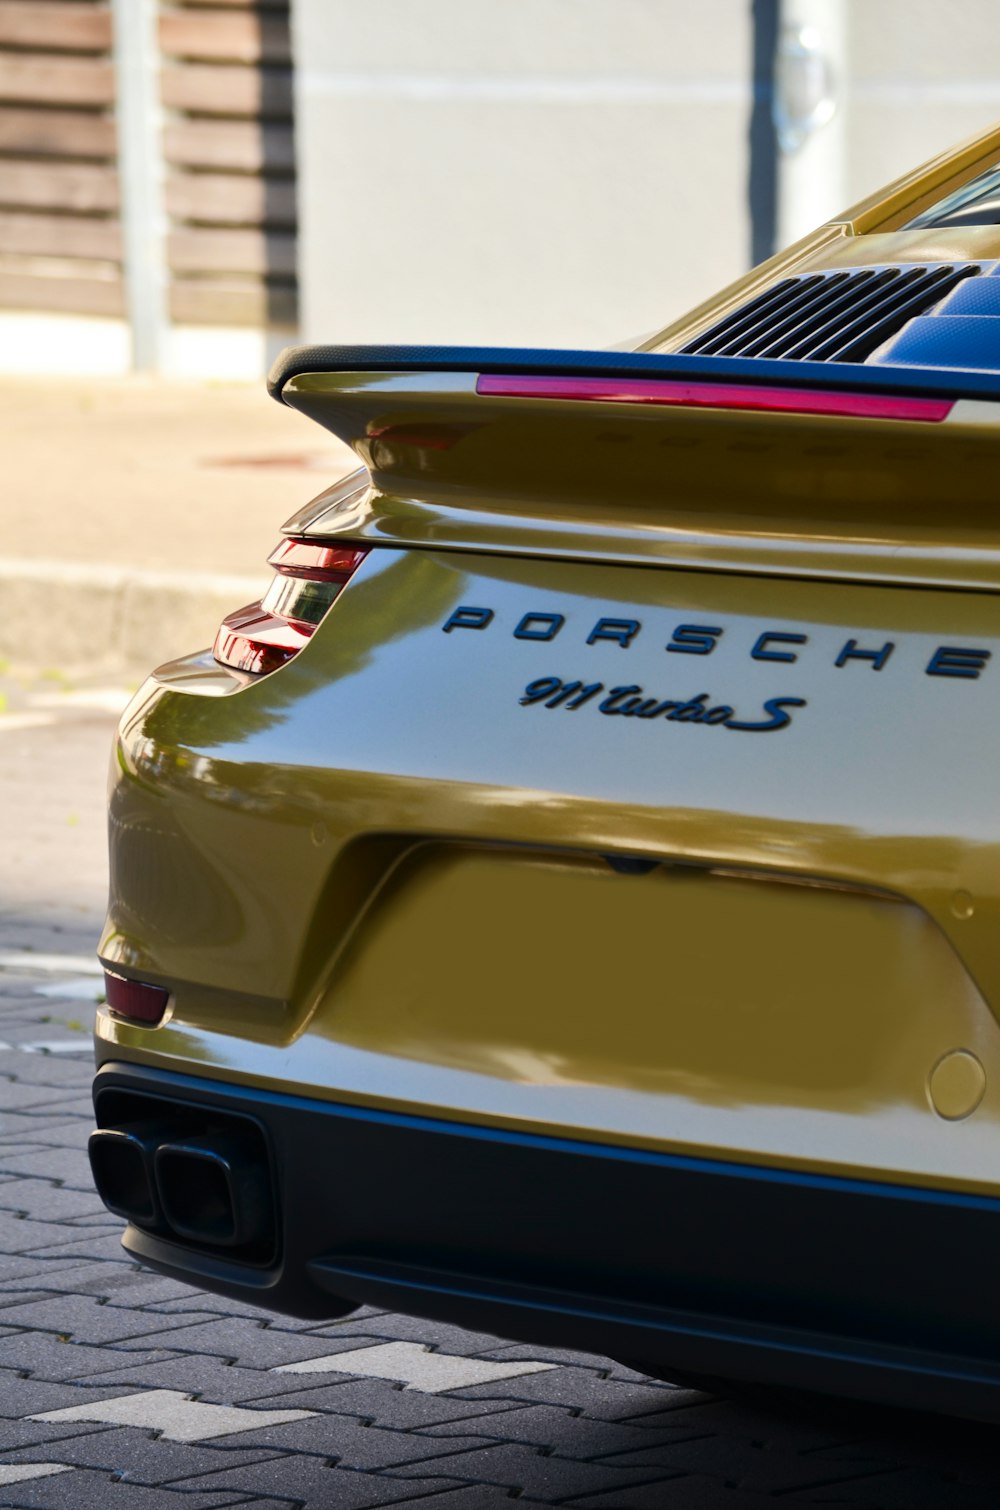 the rear end of a porsche car parked on the side of the road